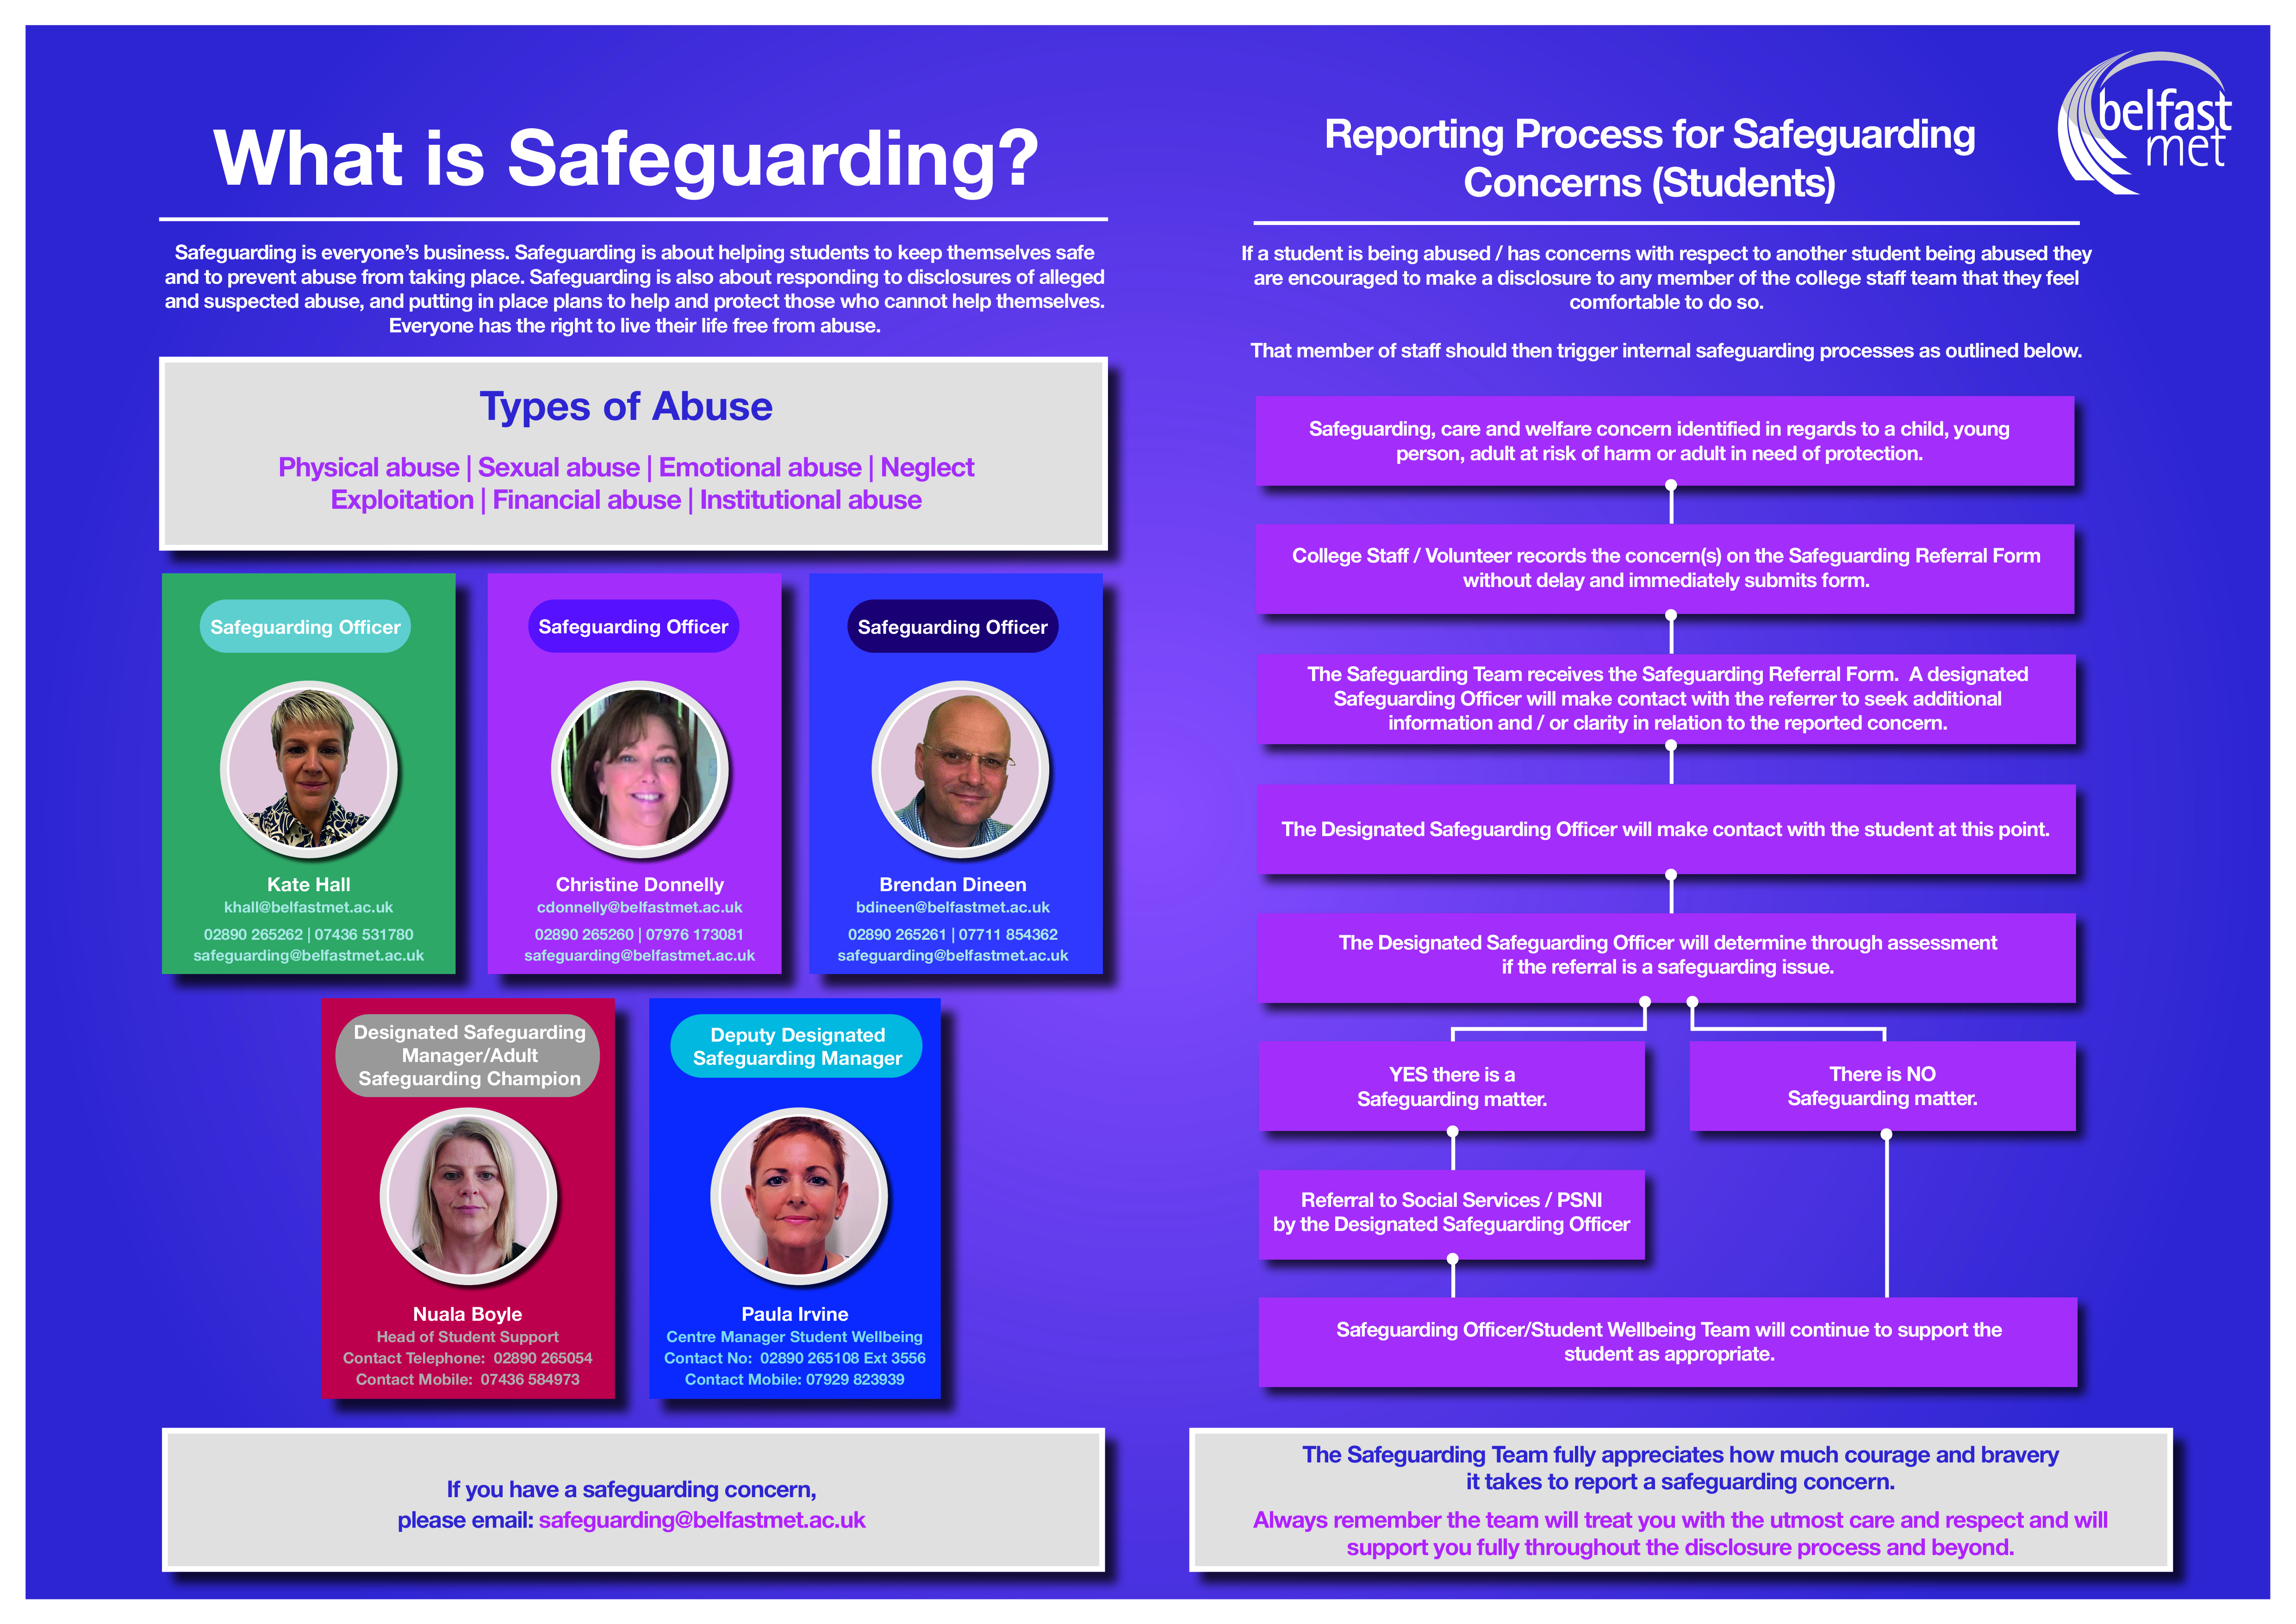 poster showing the designated safeguarding team alongside text and table detailing, 'what is safeguarding'  and the reporting process for safeguarding concerns